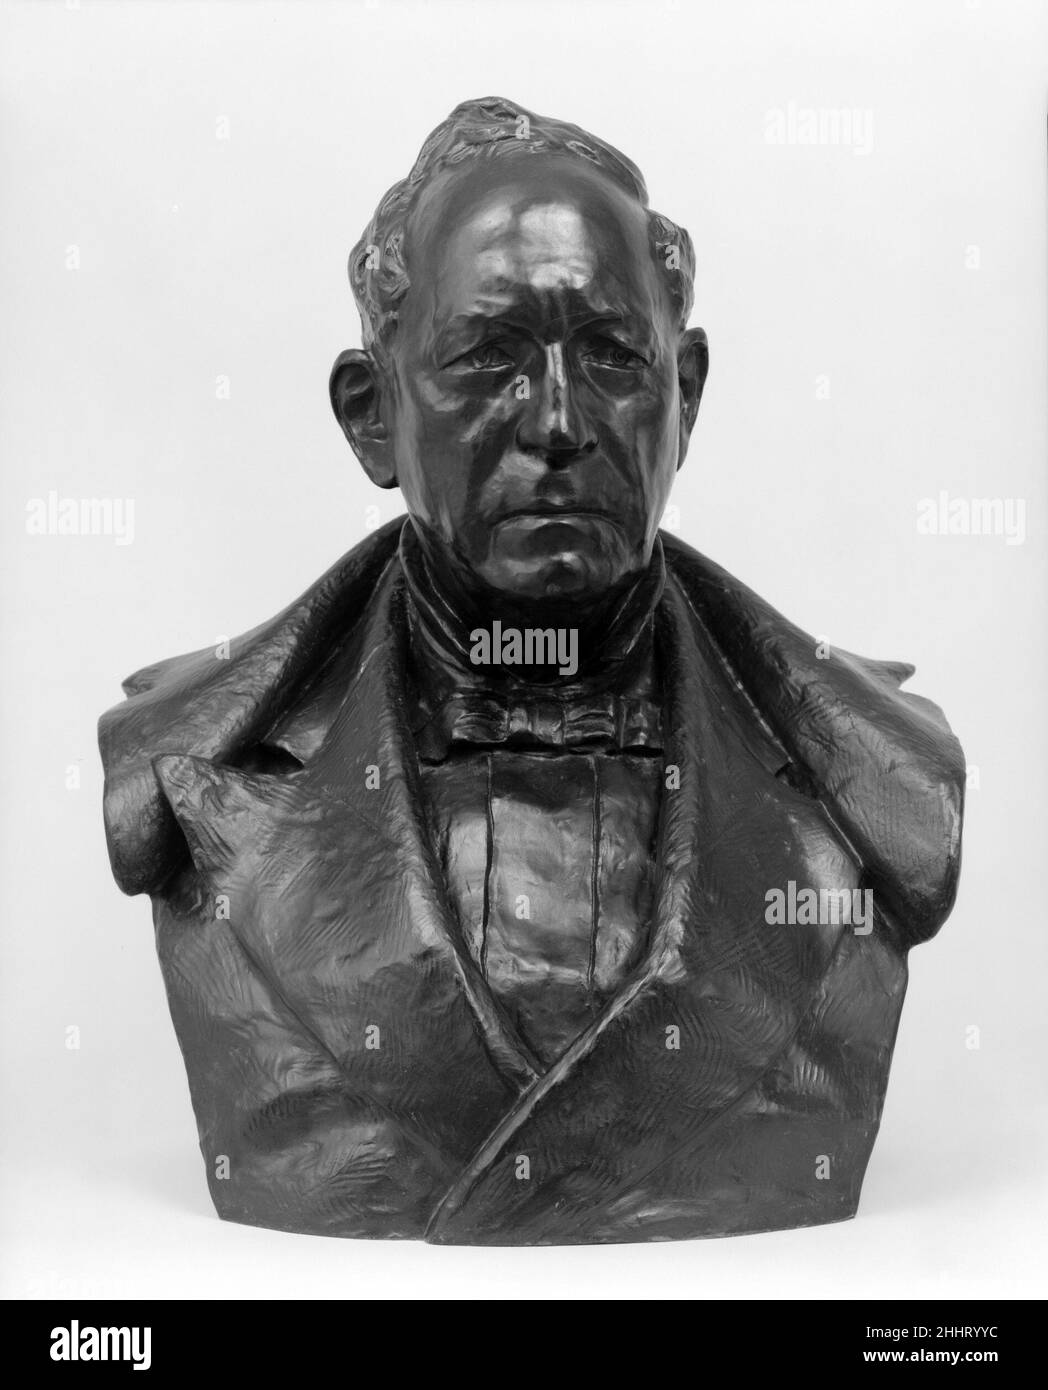 John Insley Blair 1883, cast 1897–98 Olin Levi Warner American John Insley Blair (1802–1899) was an American financier and railroad developer who served as director of the Delaware, Lackawanna, and Western Railroad system from its inception in 1852 until his death. The likeness is one of the sculptor’s most successful in the sure modeling, rich textural variation, and powerful evocation of character. The artist faithfully recorded Blair’s physical traits: balding forehead, large-lobed ears, narrow-set eyes, and weathered skin. This bust was one of eleven works by Warner given to the museum by Stock Photo